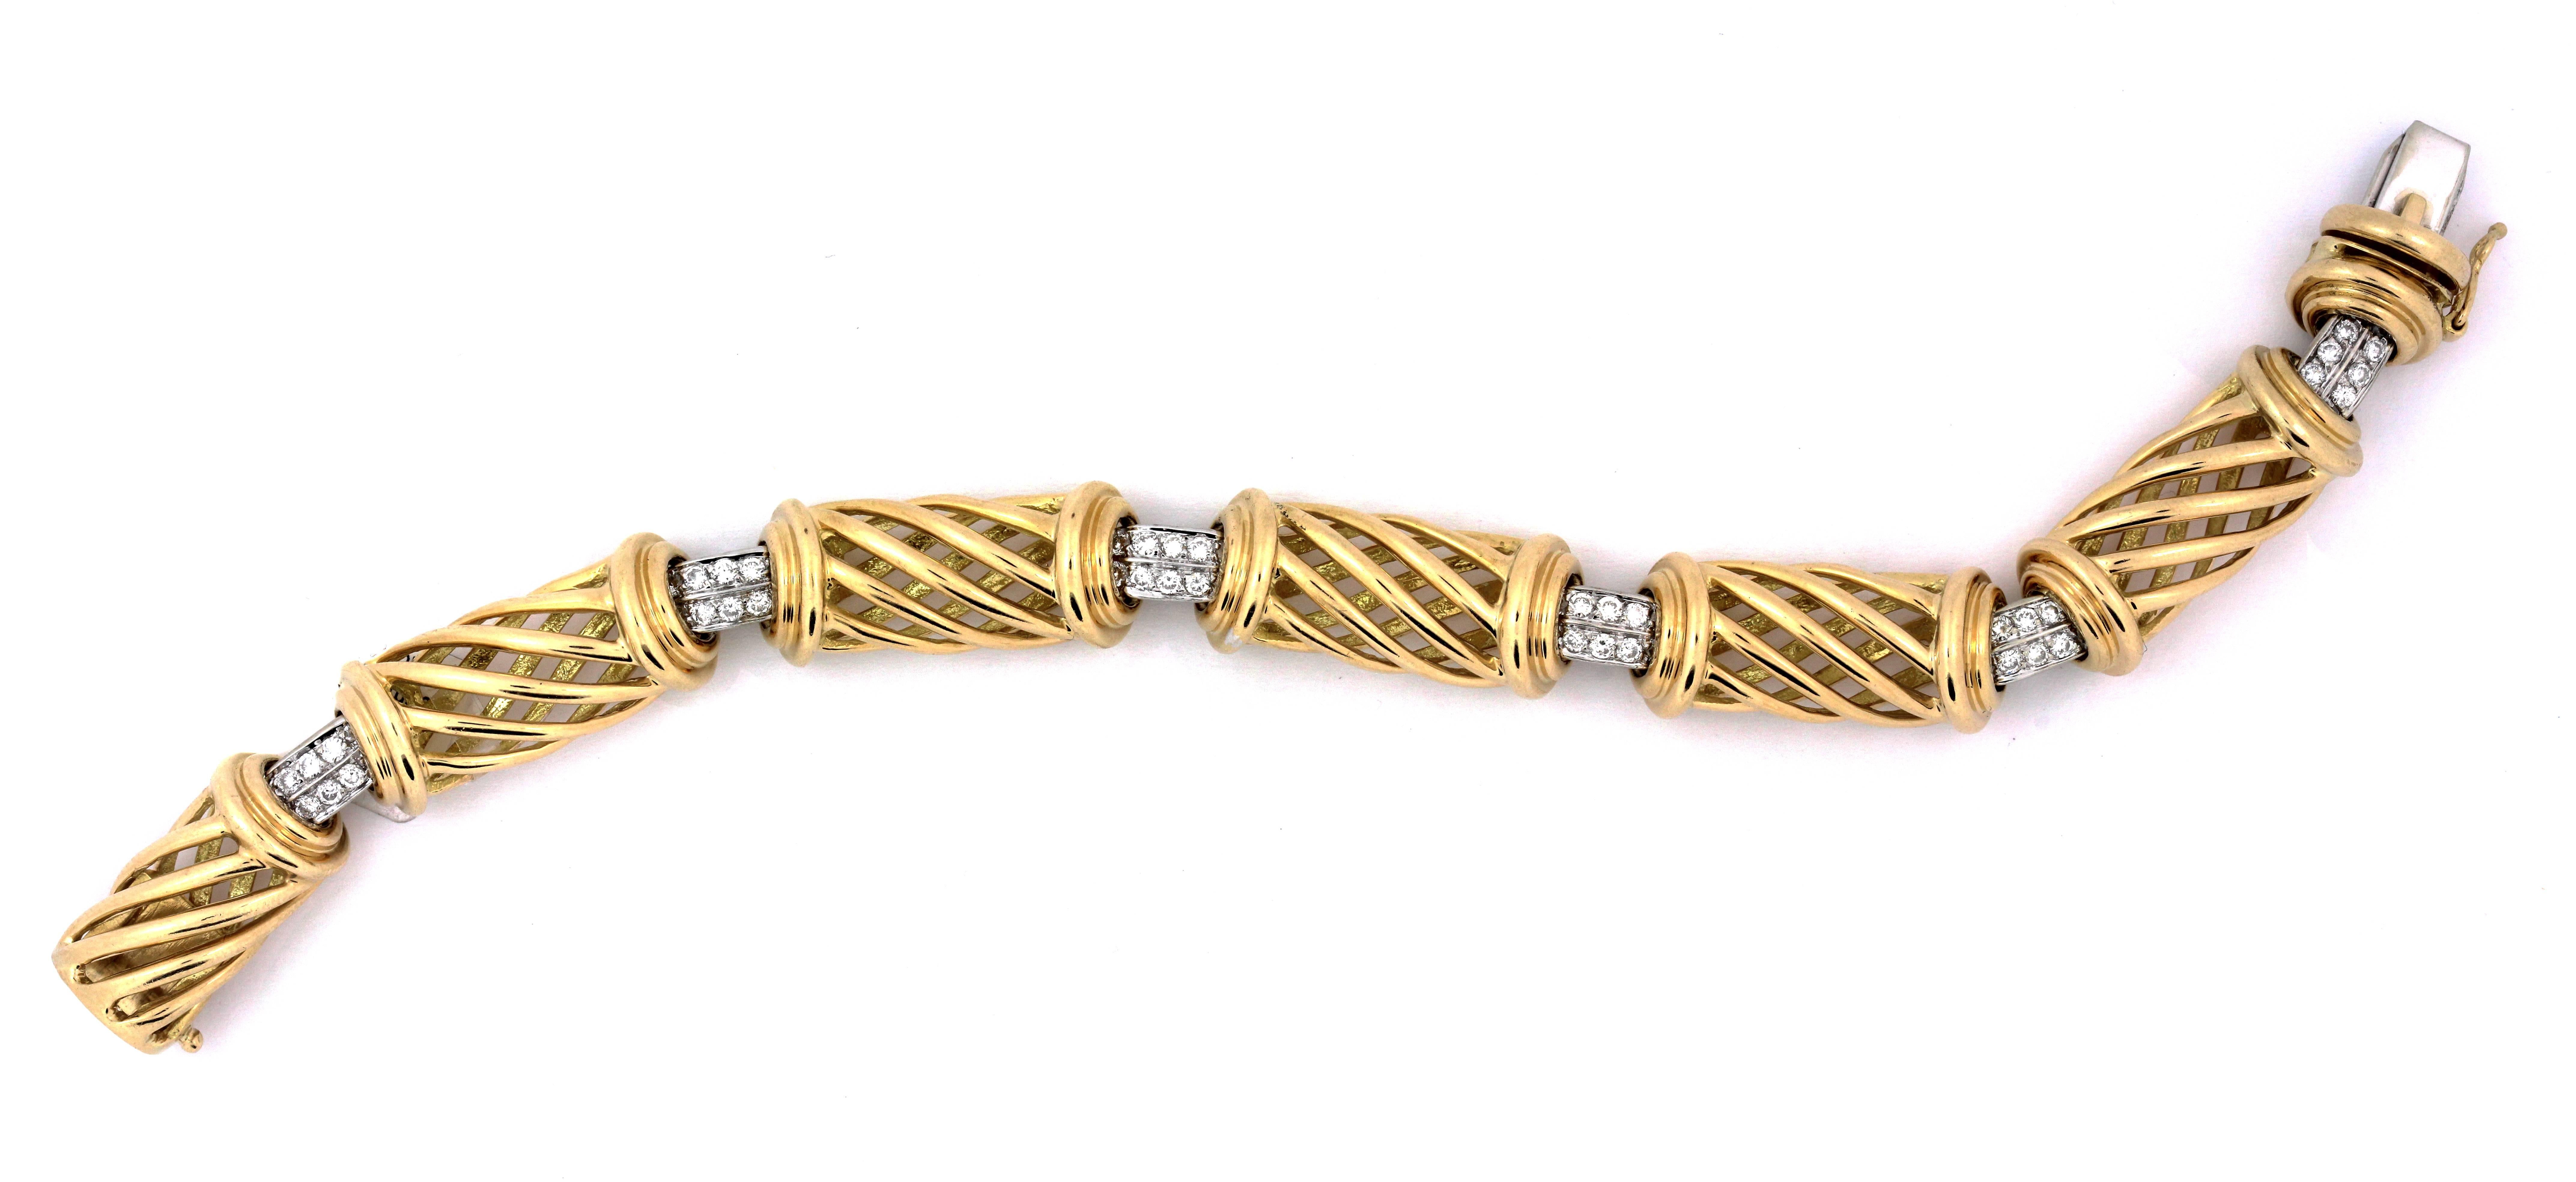 18K Yellow and White Gold Bracelet with Diamonds 

Six diamond sections with weighing 1.80ct. 
All diamonds are G Color VS Clarity

Stunning design work on bracelet, all links have a 3D like feel.

Bracelet is 7 inches in length, 0.4 inch